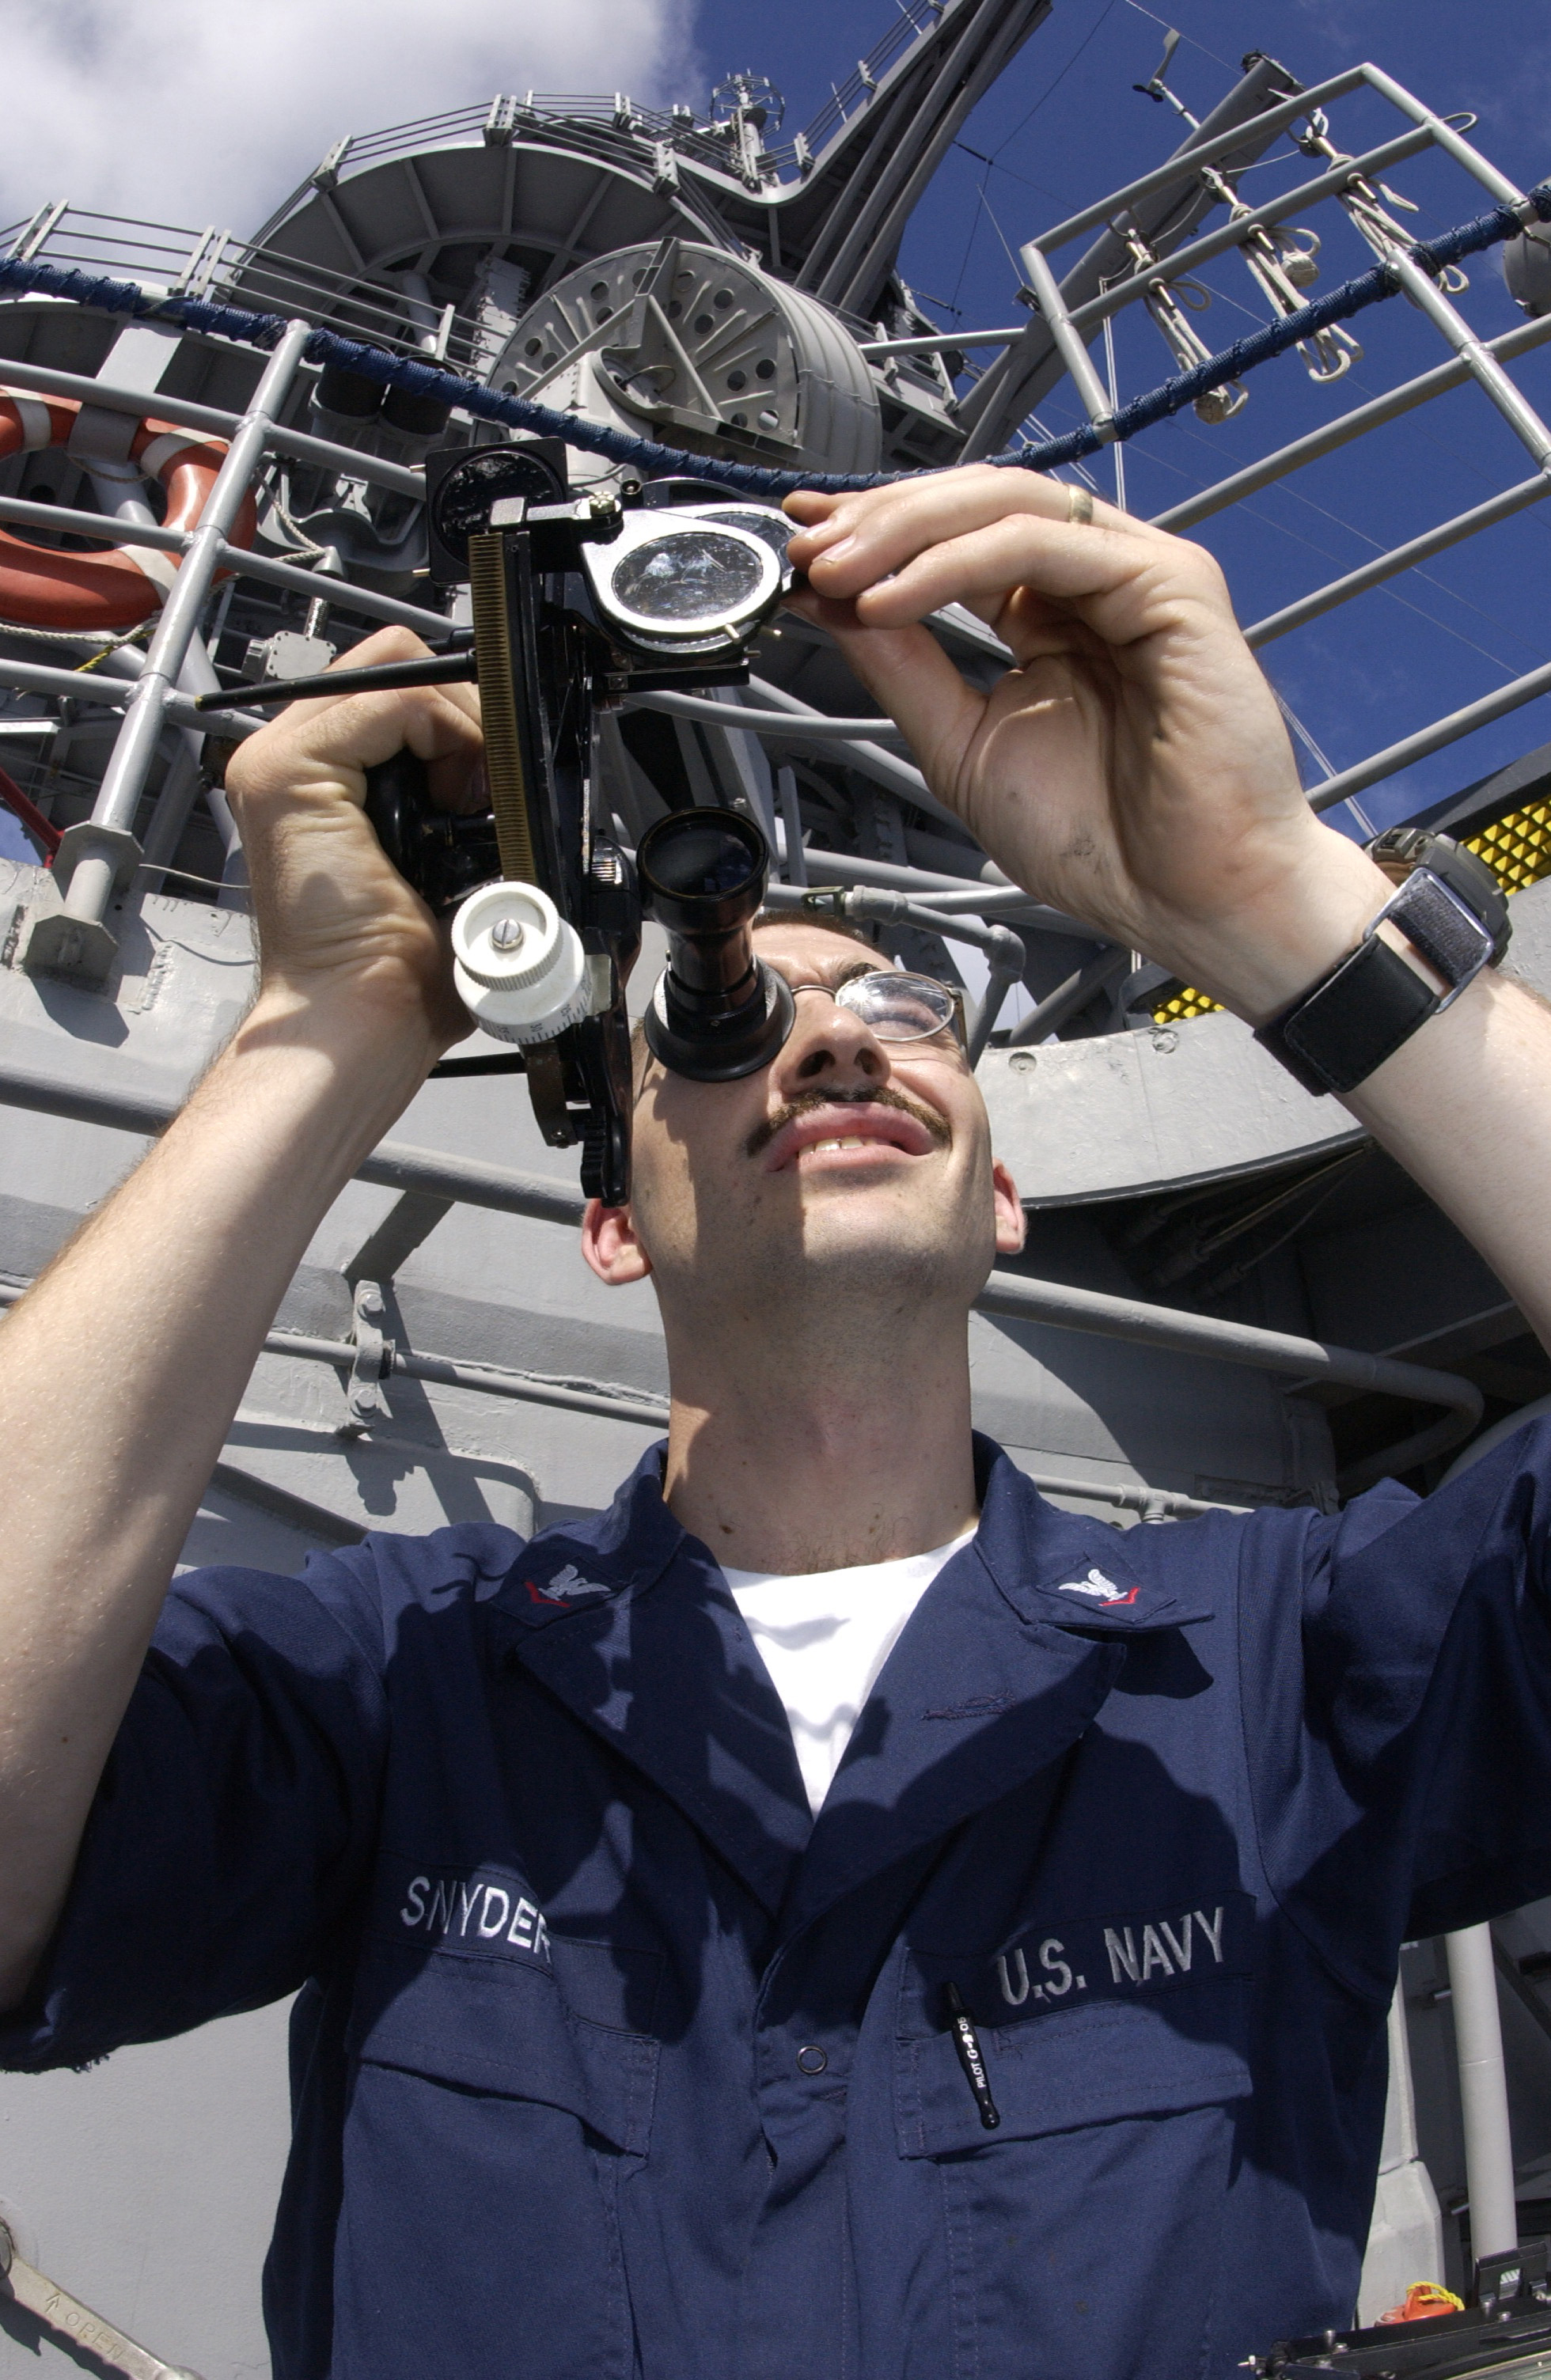 US Navy 030822-N-2613R-001 Aboard the destroyer USS Cushing (DD 85), Quartermaster 3rd Class Ryan Snyder, from Metropolis, Ind. shoots an azimuth bearing using a sextant